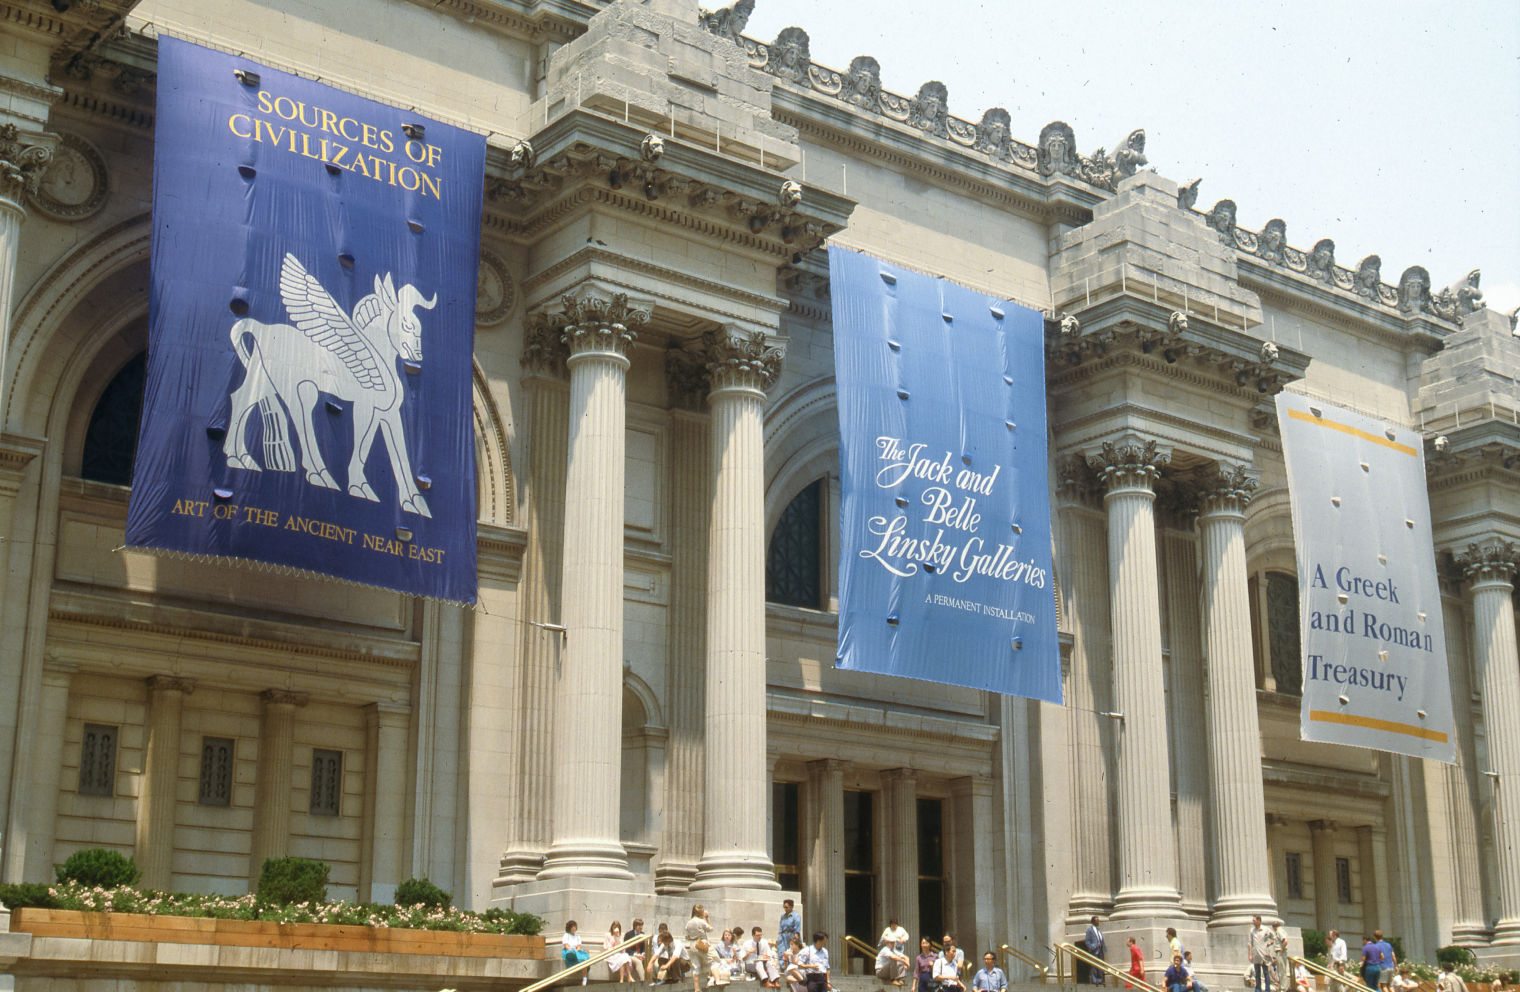 Entrance of the Metropolitan Museum of Art with people showing, left to right, banners for  “The Ancient Near Eastern Art Gallery,” “The Jack and Belle Linsky Collection,” “Greek and Roman Art Gallery”